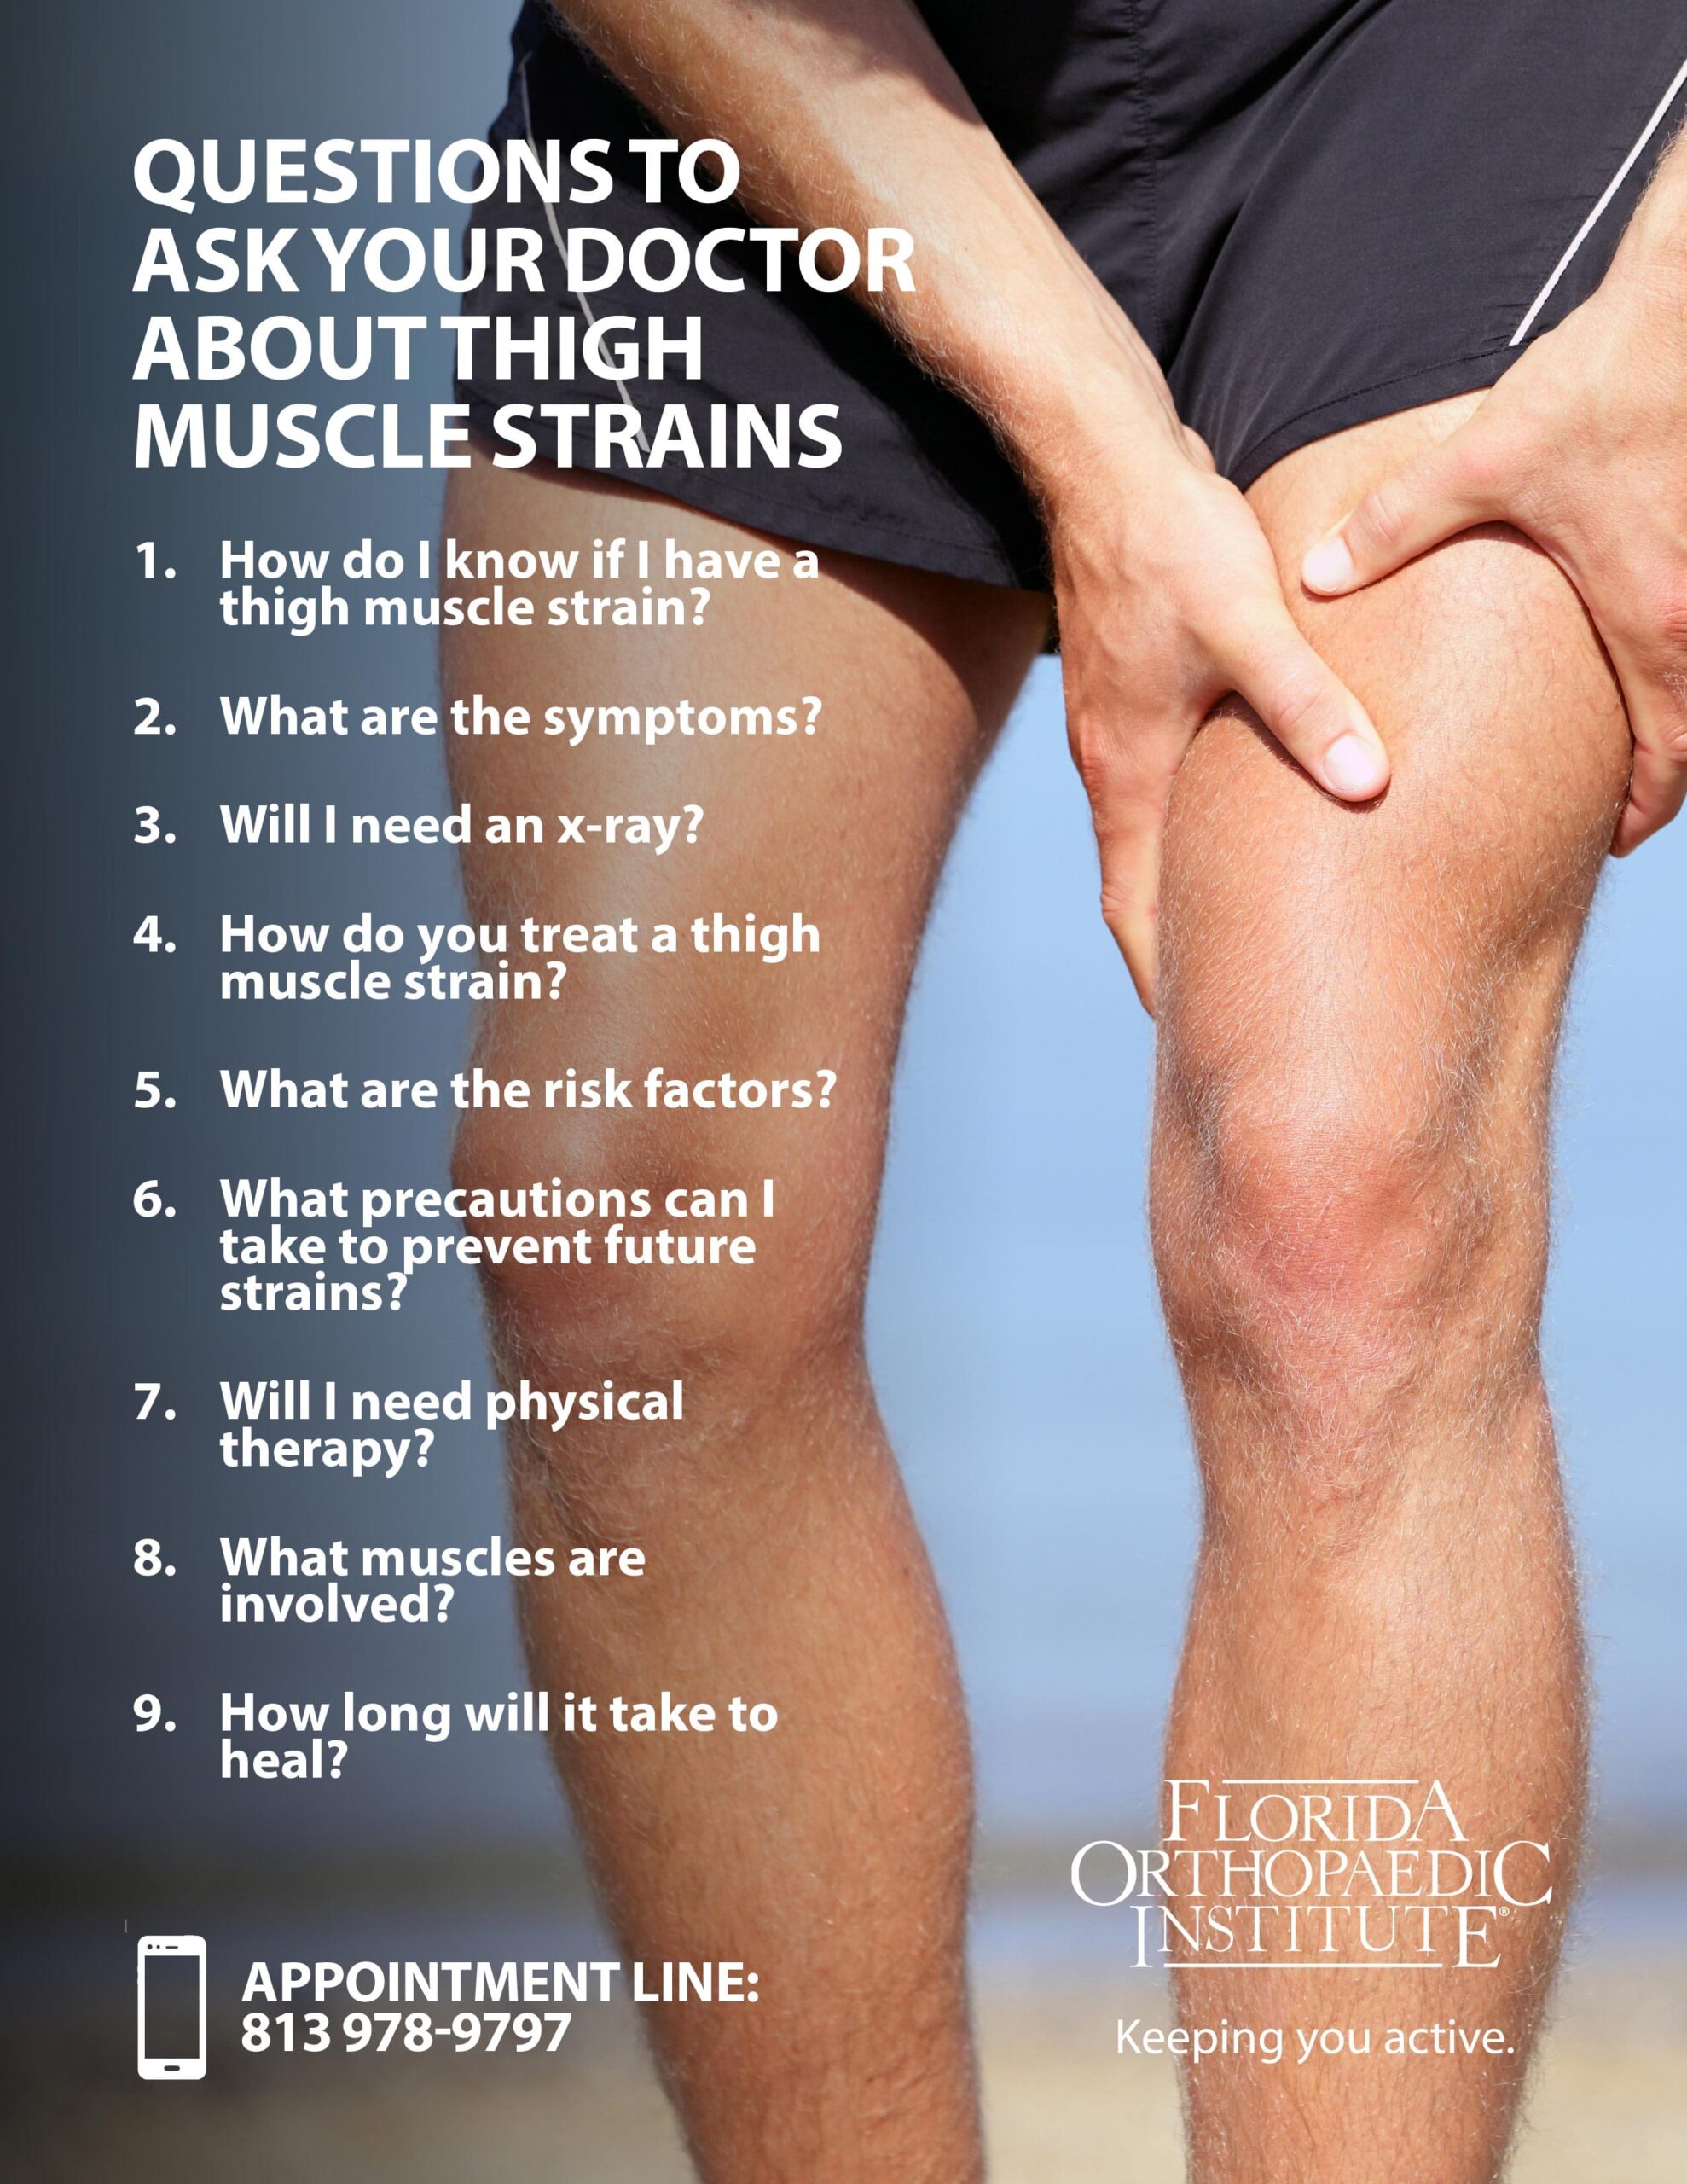 Thigh Muscle Strains Florida Orthopaedic Institute